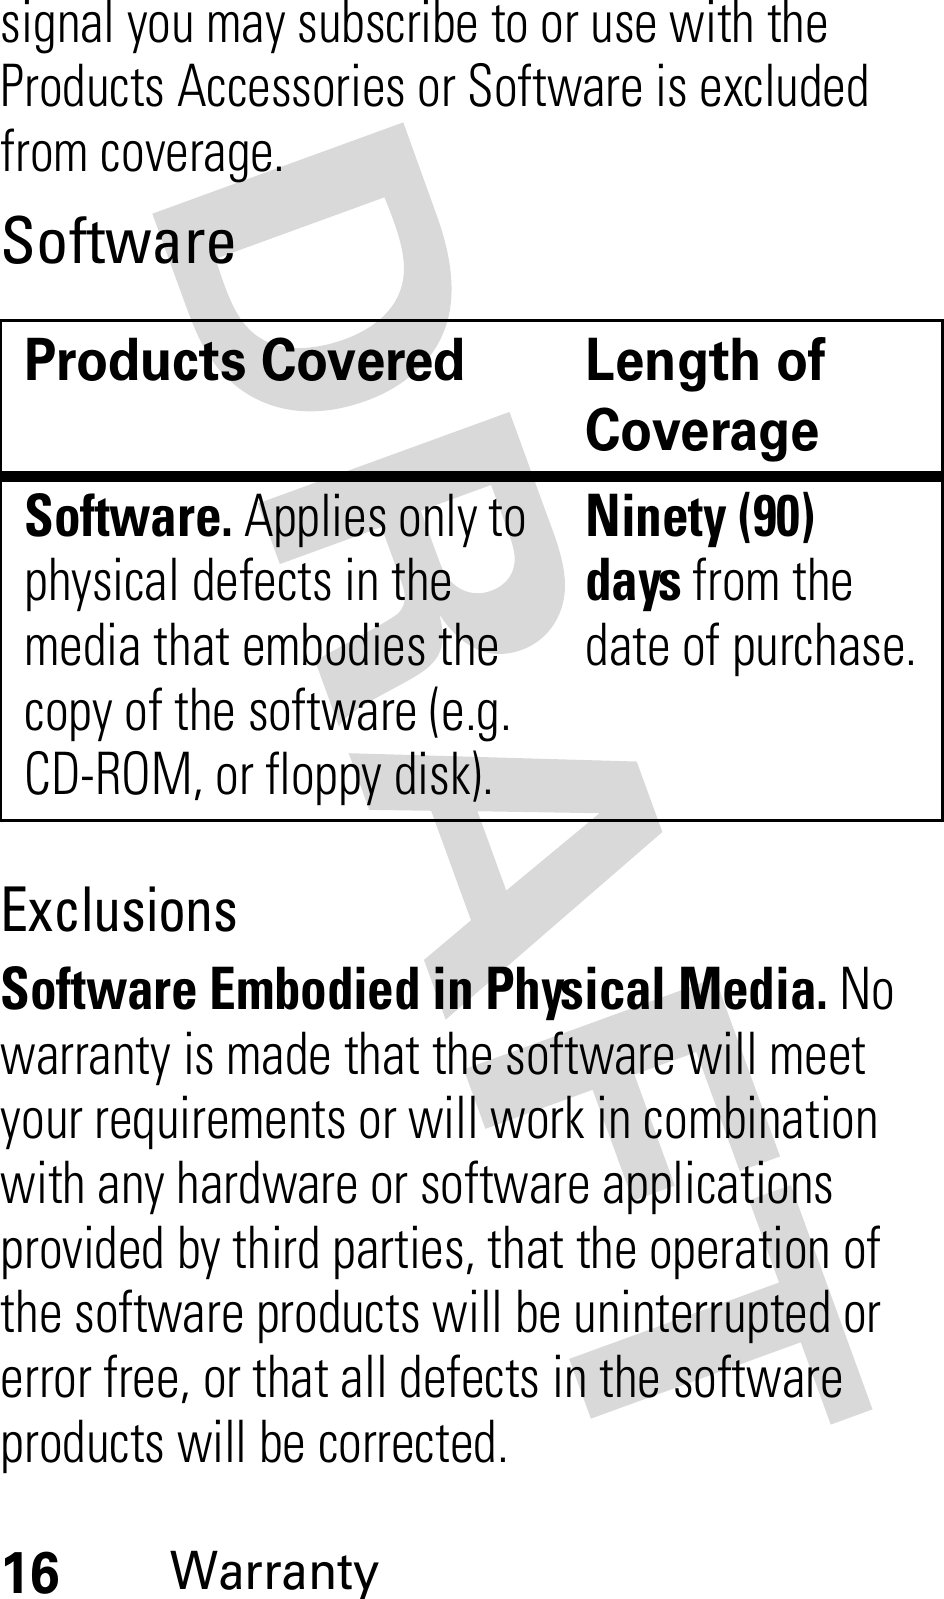 16Warrantysignal you may subscribe to or use with the Products Accessories or Software is excluded from coverage.SoftwareExclusionsSoftware Embodied in Physical Media. No warranty is made that the software will meet your requirements or will work in combination with any hardware or software applications provided by third parties, that the operation of the software products will be uninterrupted or error free, or that all defects in the software products will be corrected.Products Covered Length of CoverageSoftware. Applies only to physical defects in the media that embodies the copy of the software (e.g. CD-ROM, or floppy disk).Ninety (90) days from the date of purchase.